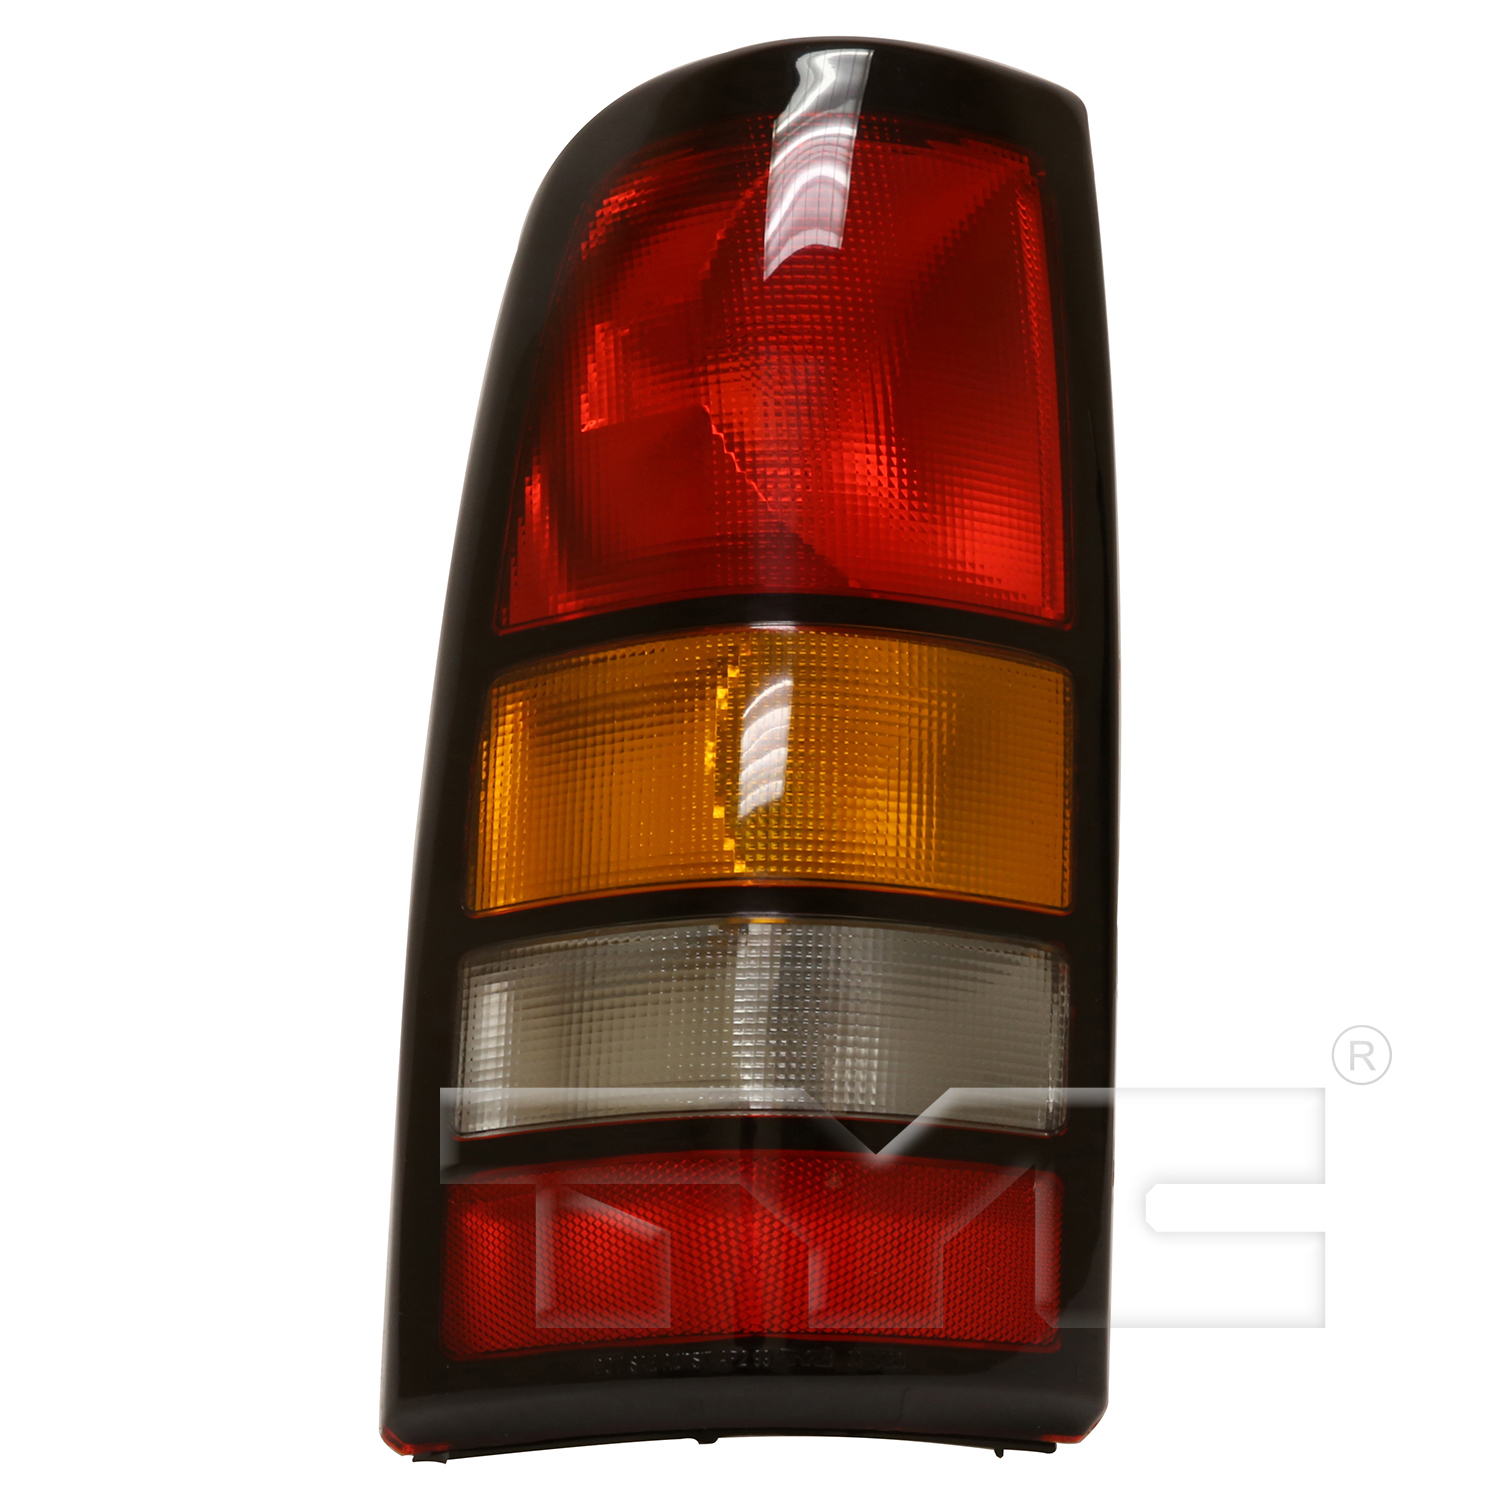 Aftermarket TAILLIGHTS for GMC - SIERRA 1500 CLASSIC, SIERRA 1500 CLASSIC,07-07,LT Taillamp assy